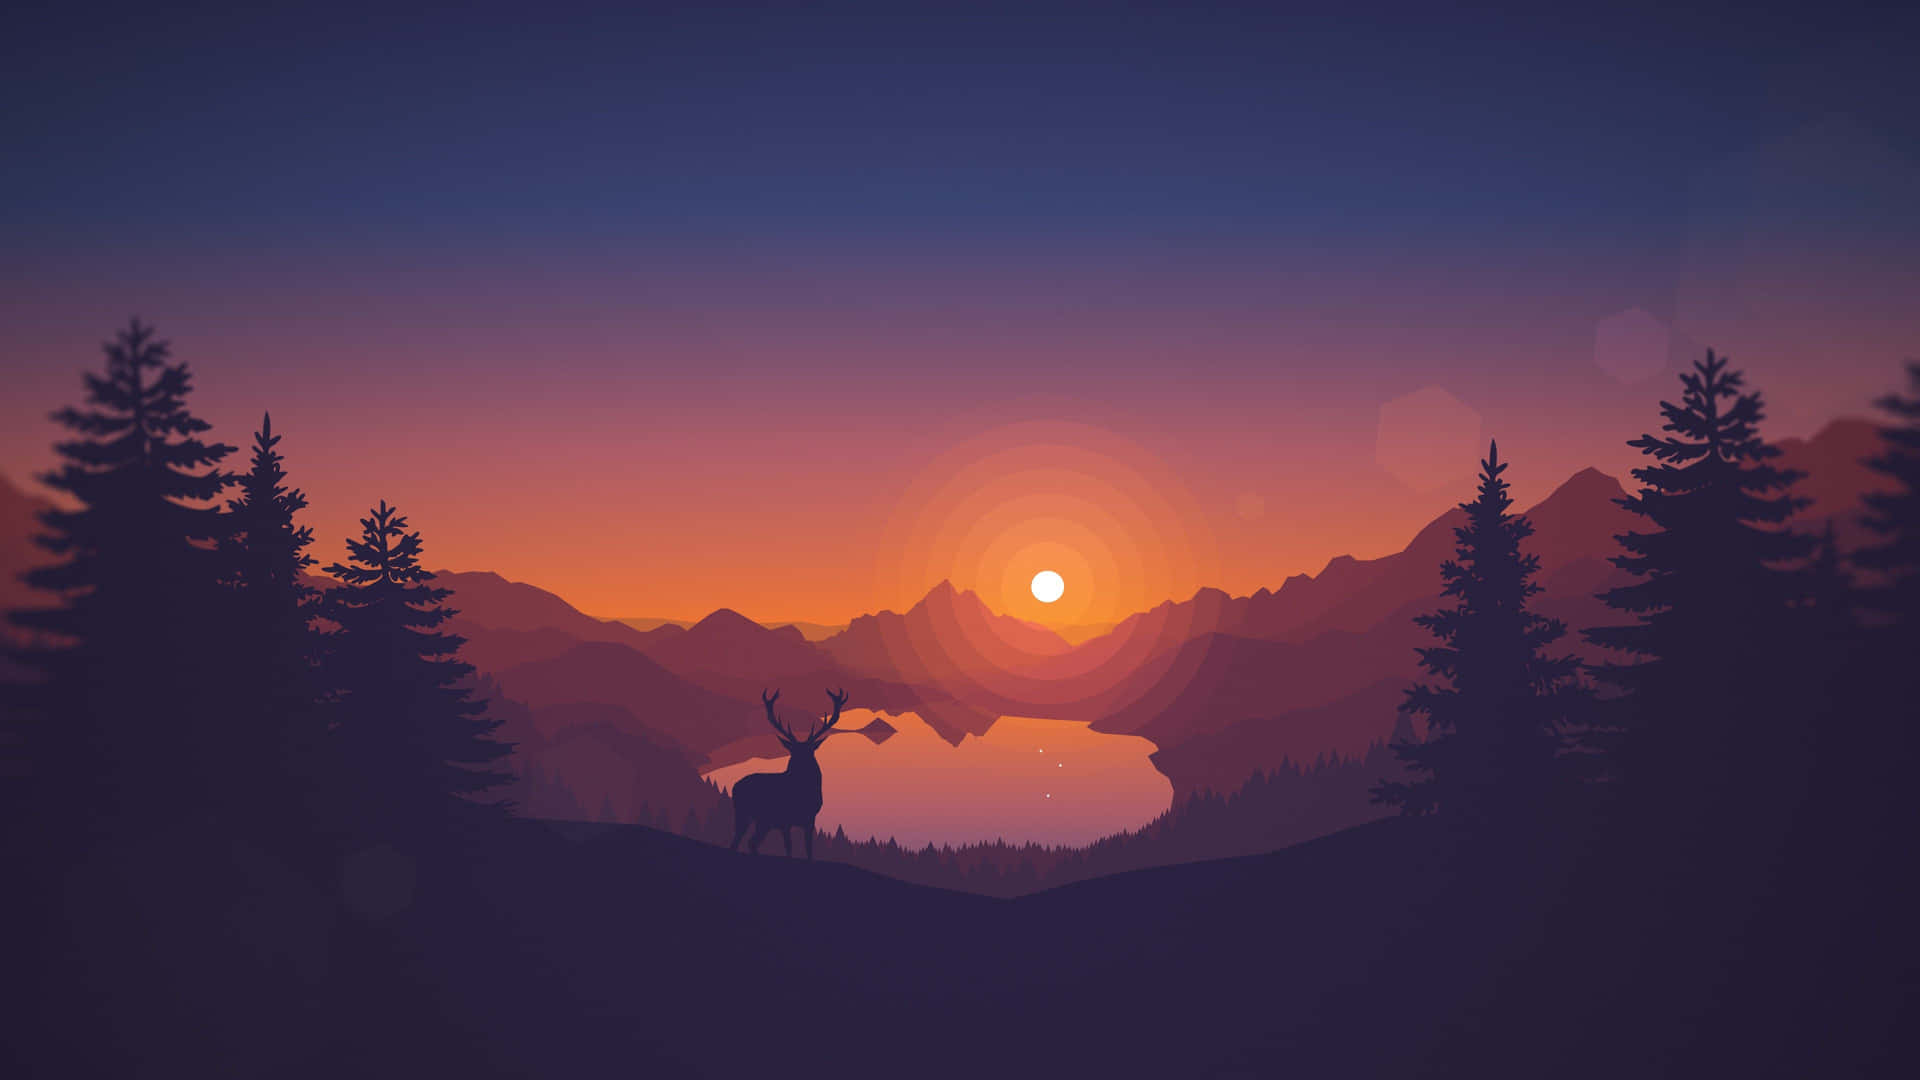 A Deer Silhouetted Against The Sunset In The Mountains Wallpaper